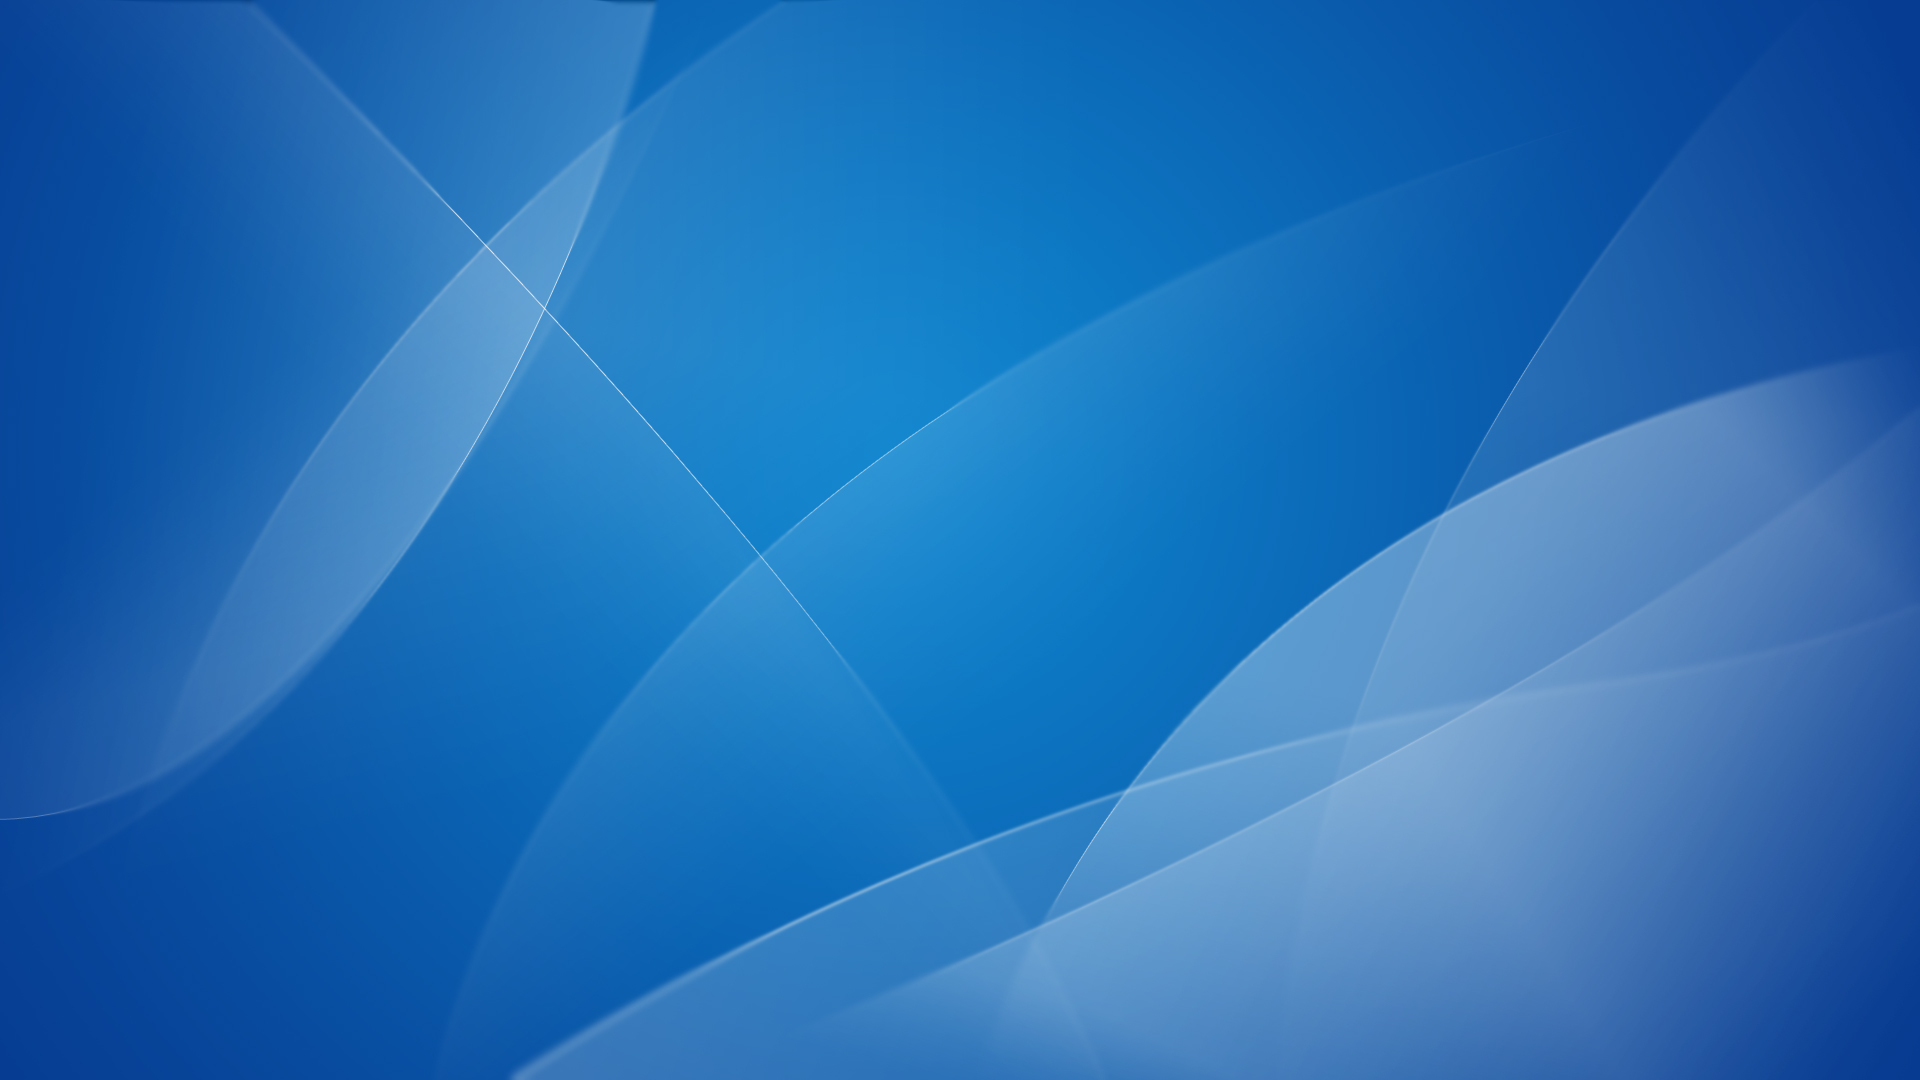 30 HD Blue WallpapersBackgrounds For Free Download